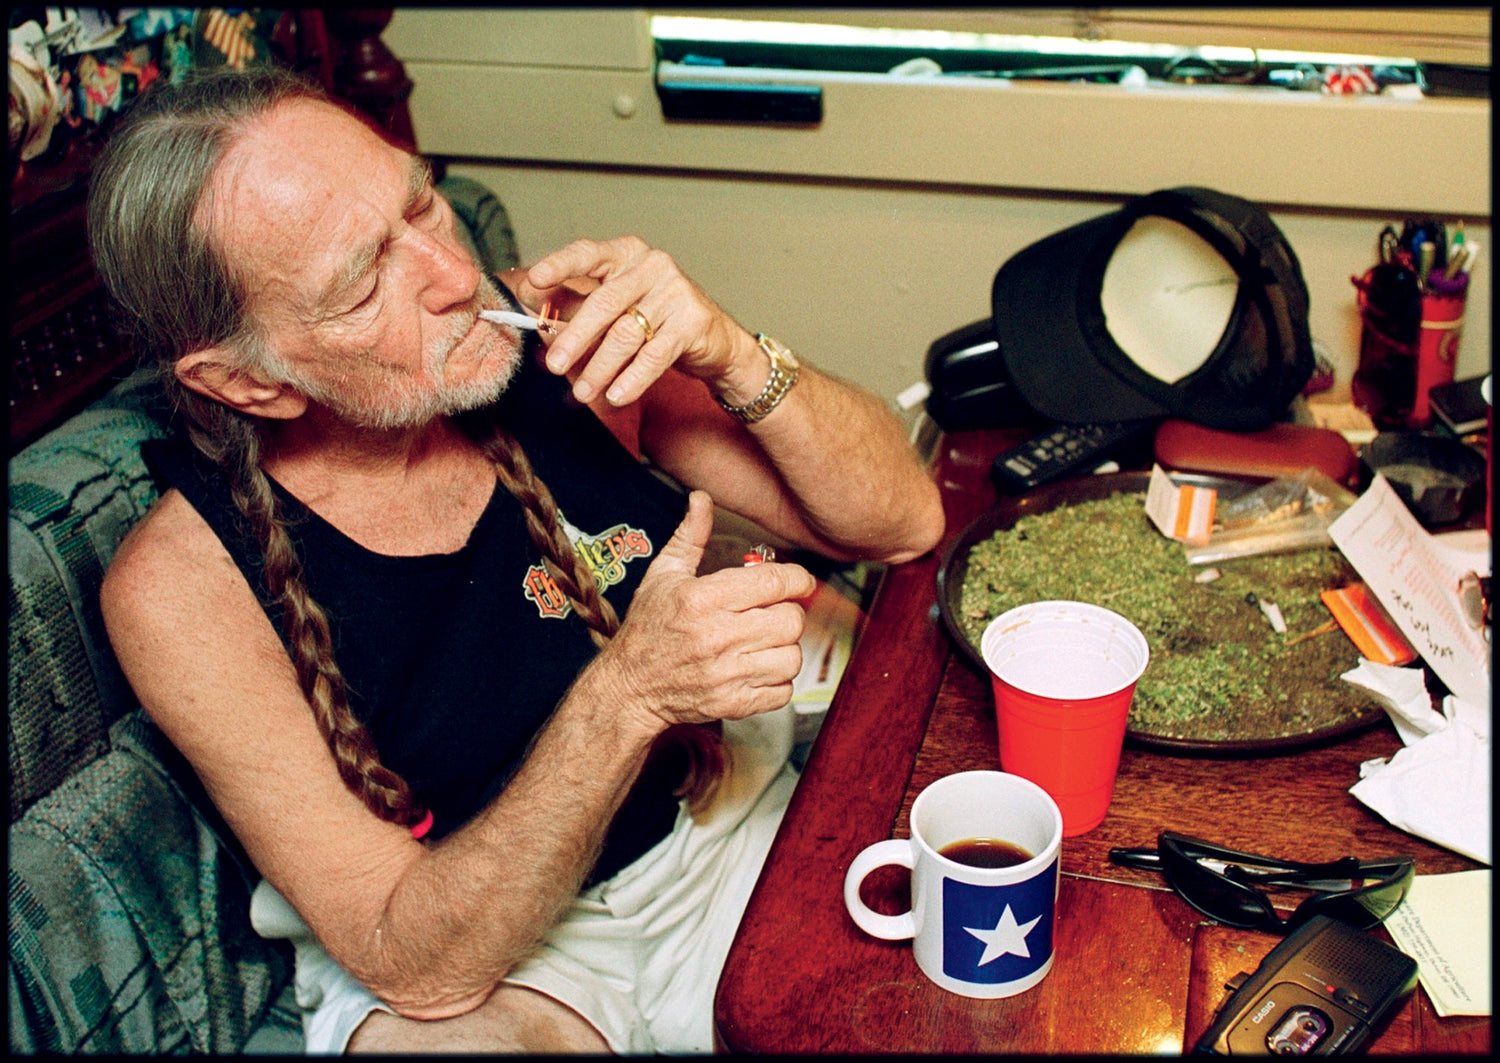 Clio Cannabis To Award Willie Nelson, Additional Honorees For Cannabis Advocacy